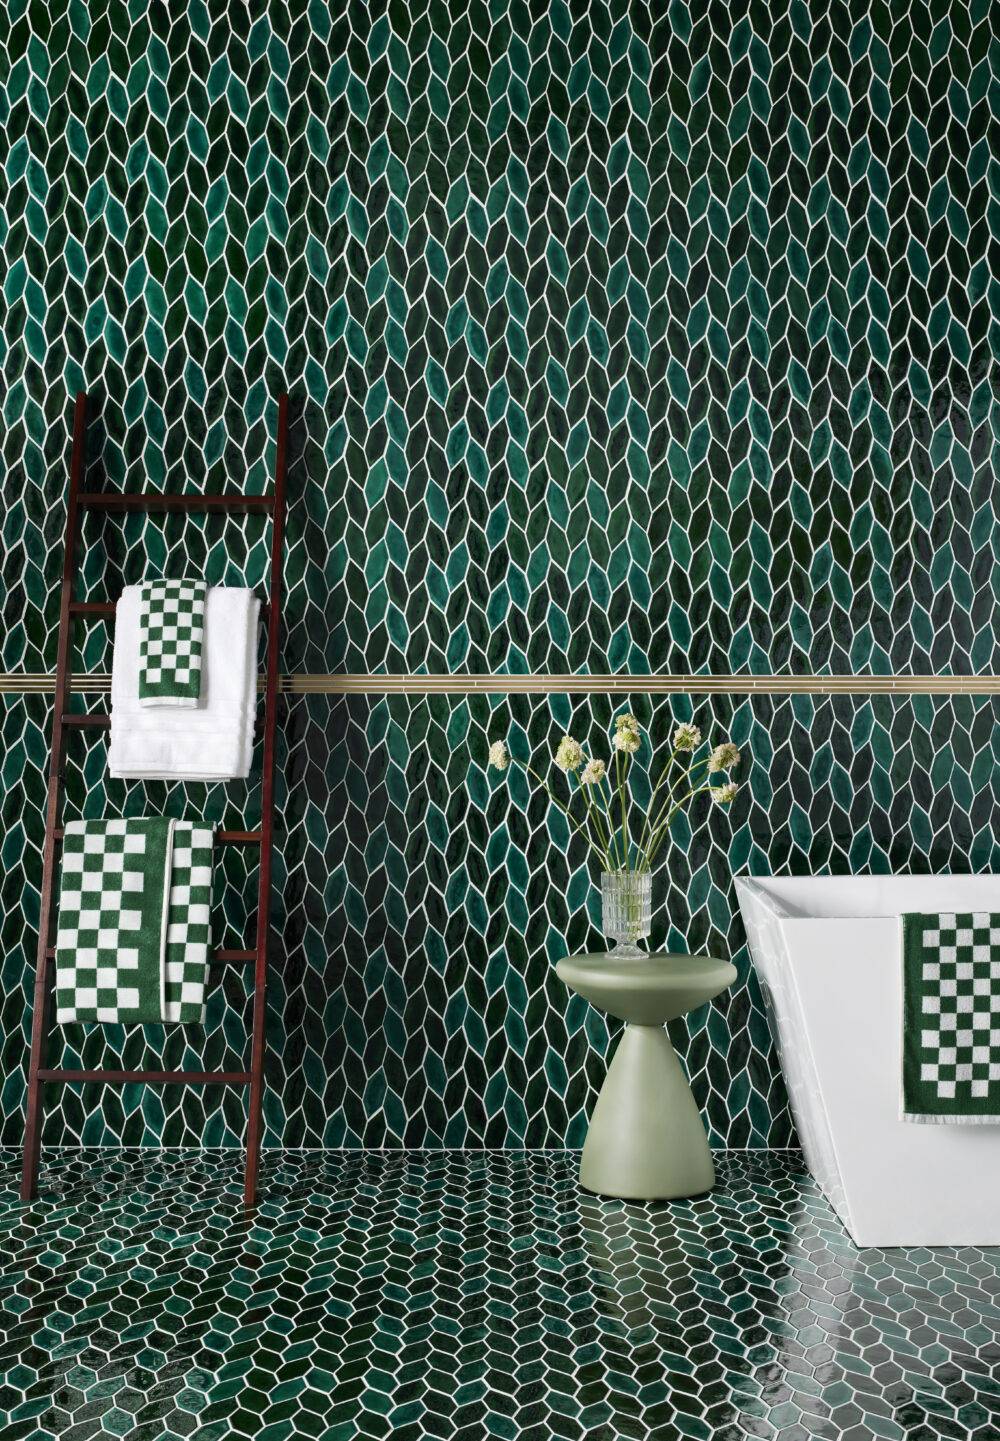 Green-leaf wall and floor tile with tub, towels and small green accent table with flowers.